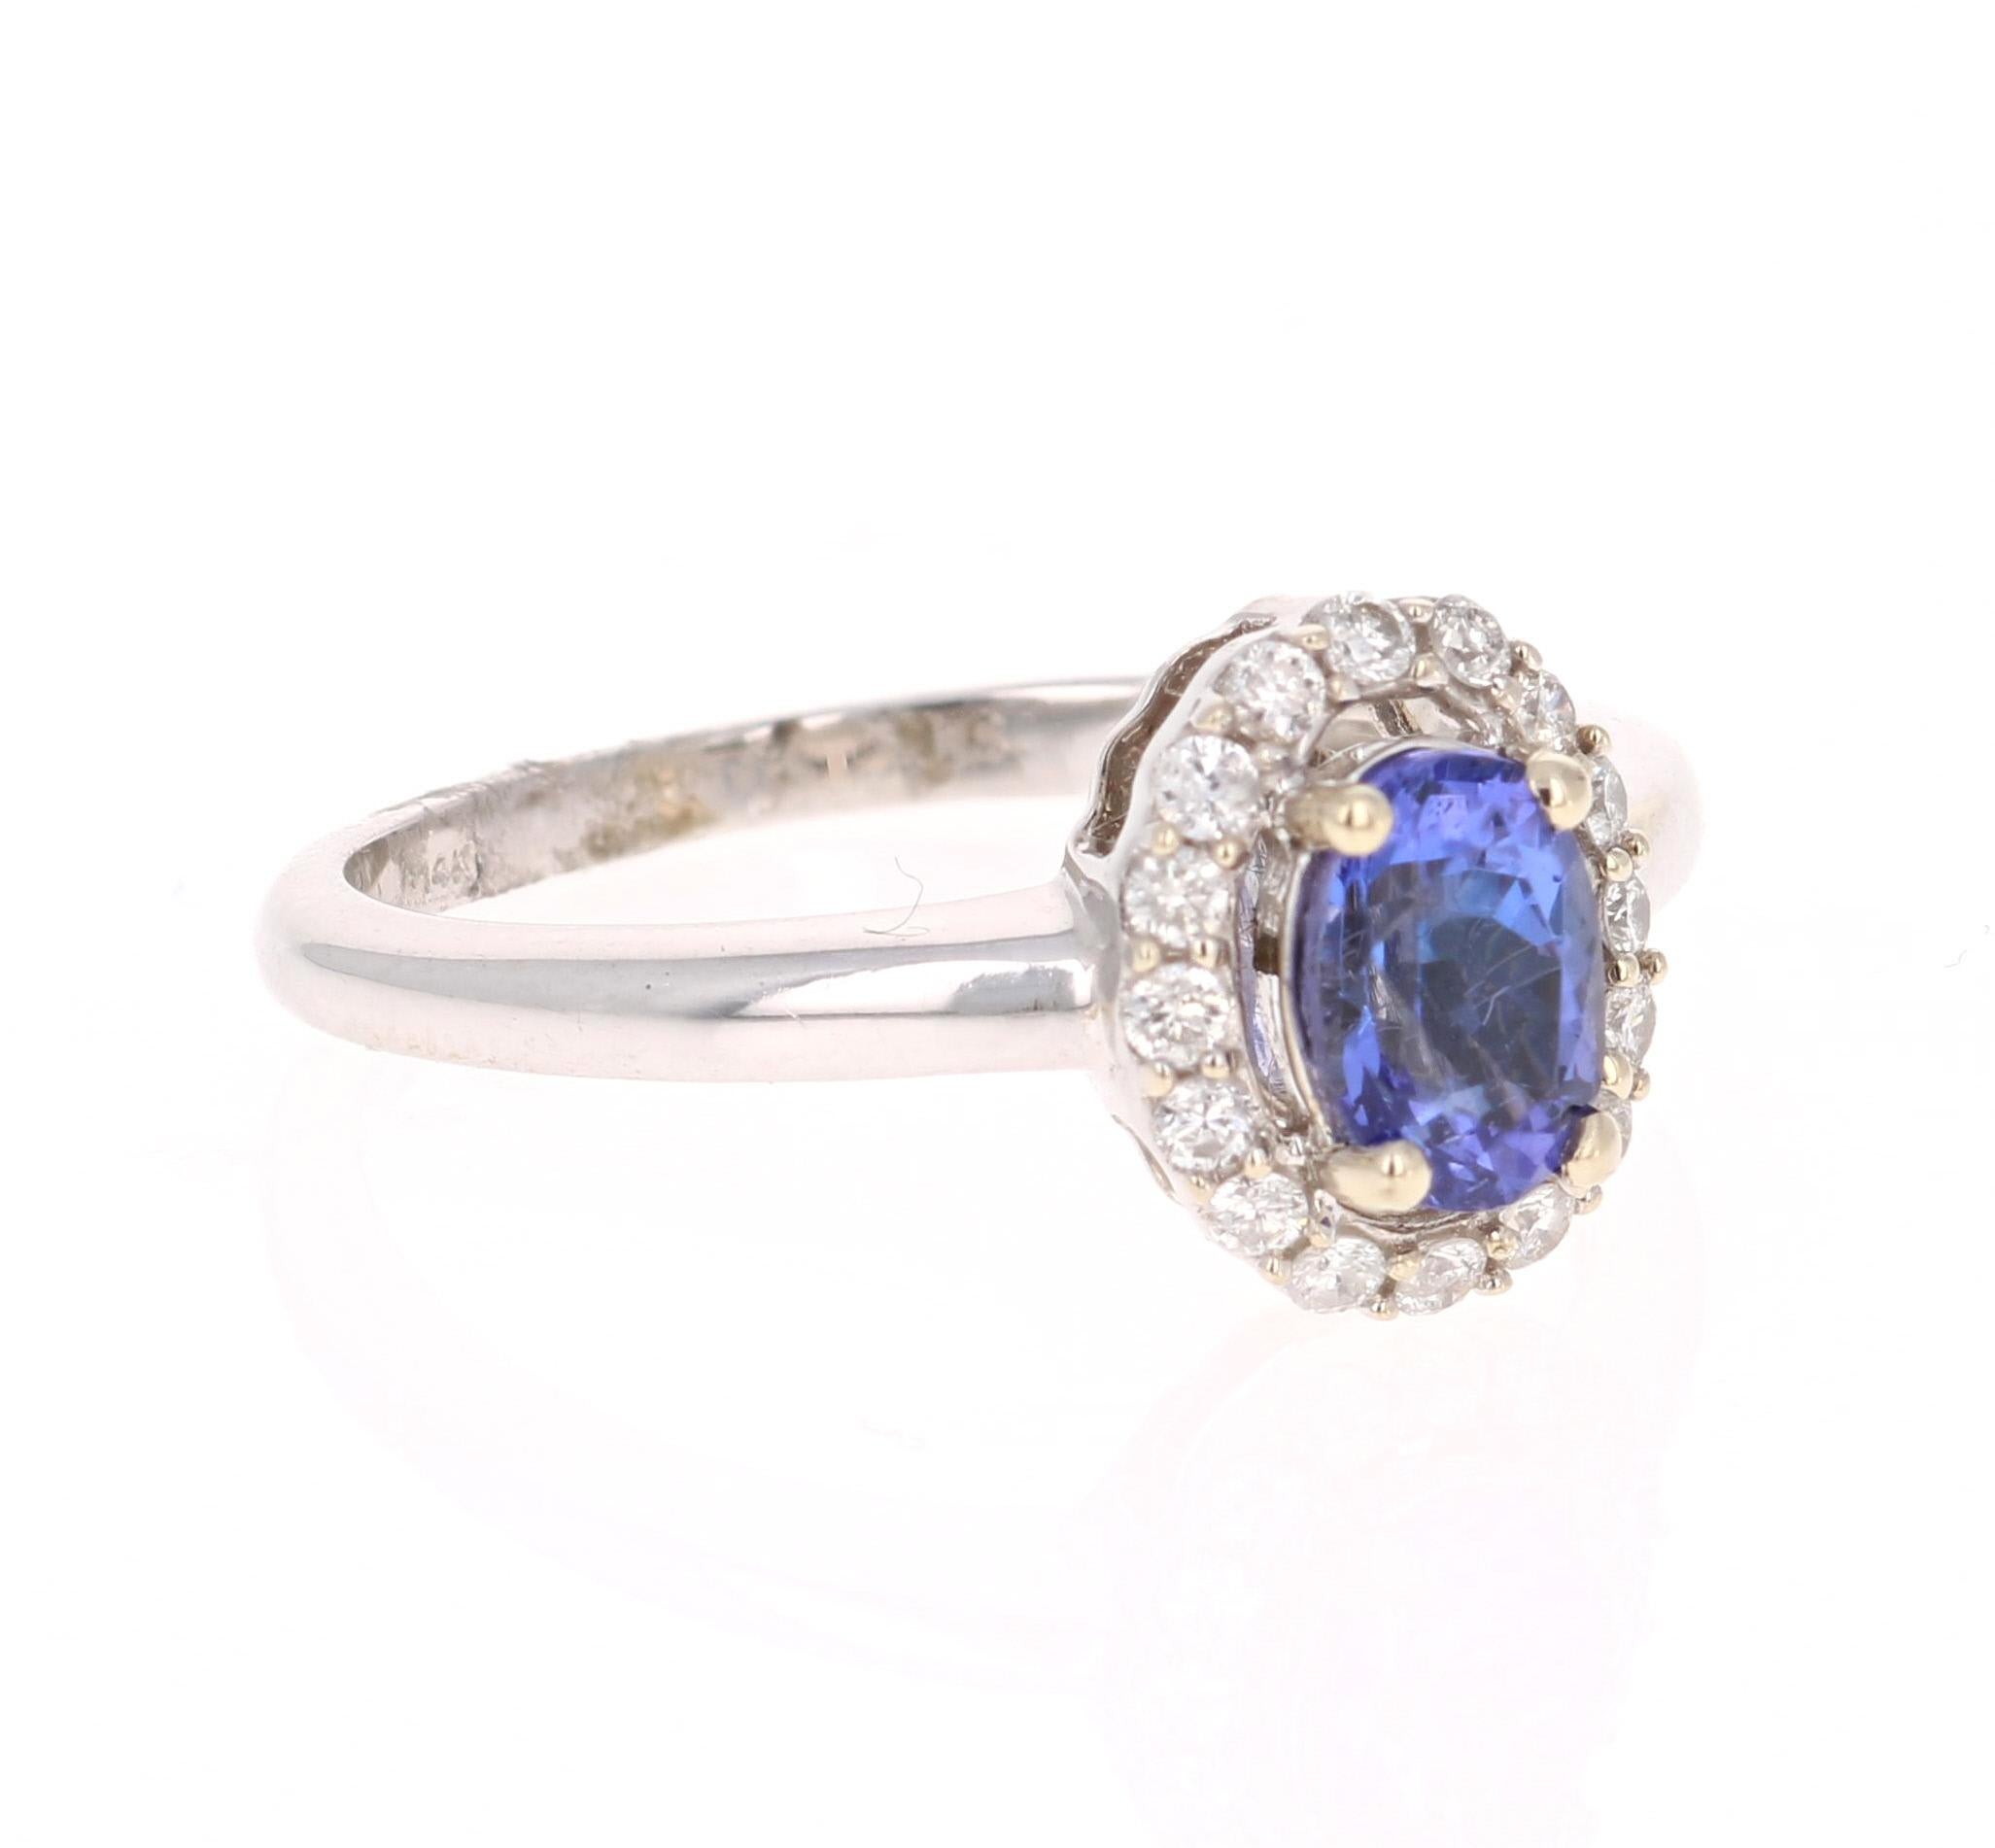 This simple everyday ring can be a promise or friendship ring! 

It has an Oval Cut Tanzanite that weighs 0.77 carats and is adorned with 17 Round Cut Diamonds that weigh 0.22 carats.

It is set in 14 Karat White Gold and weighs approximately 2.7